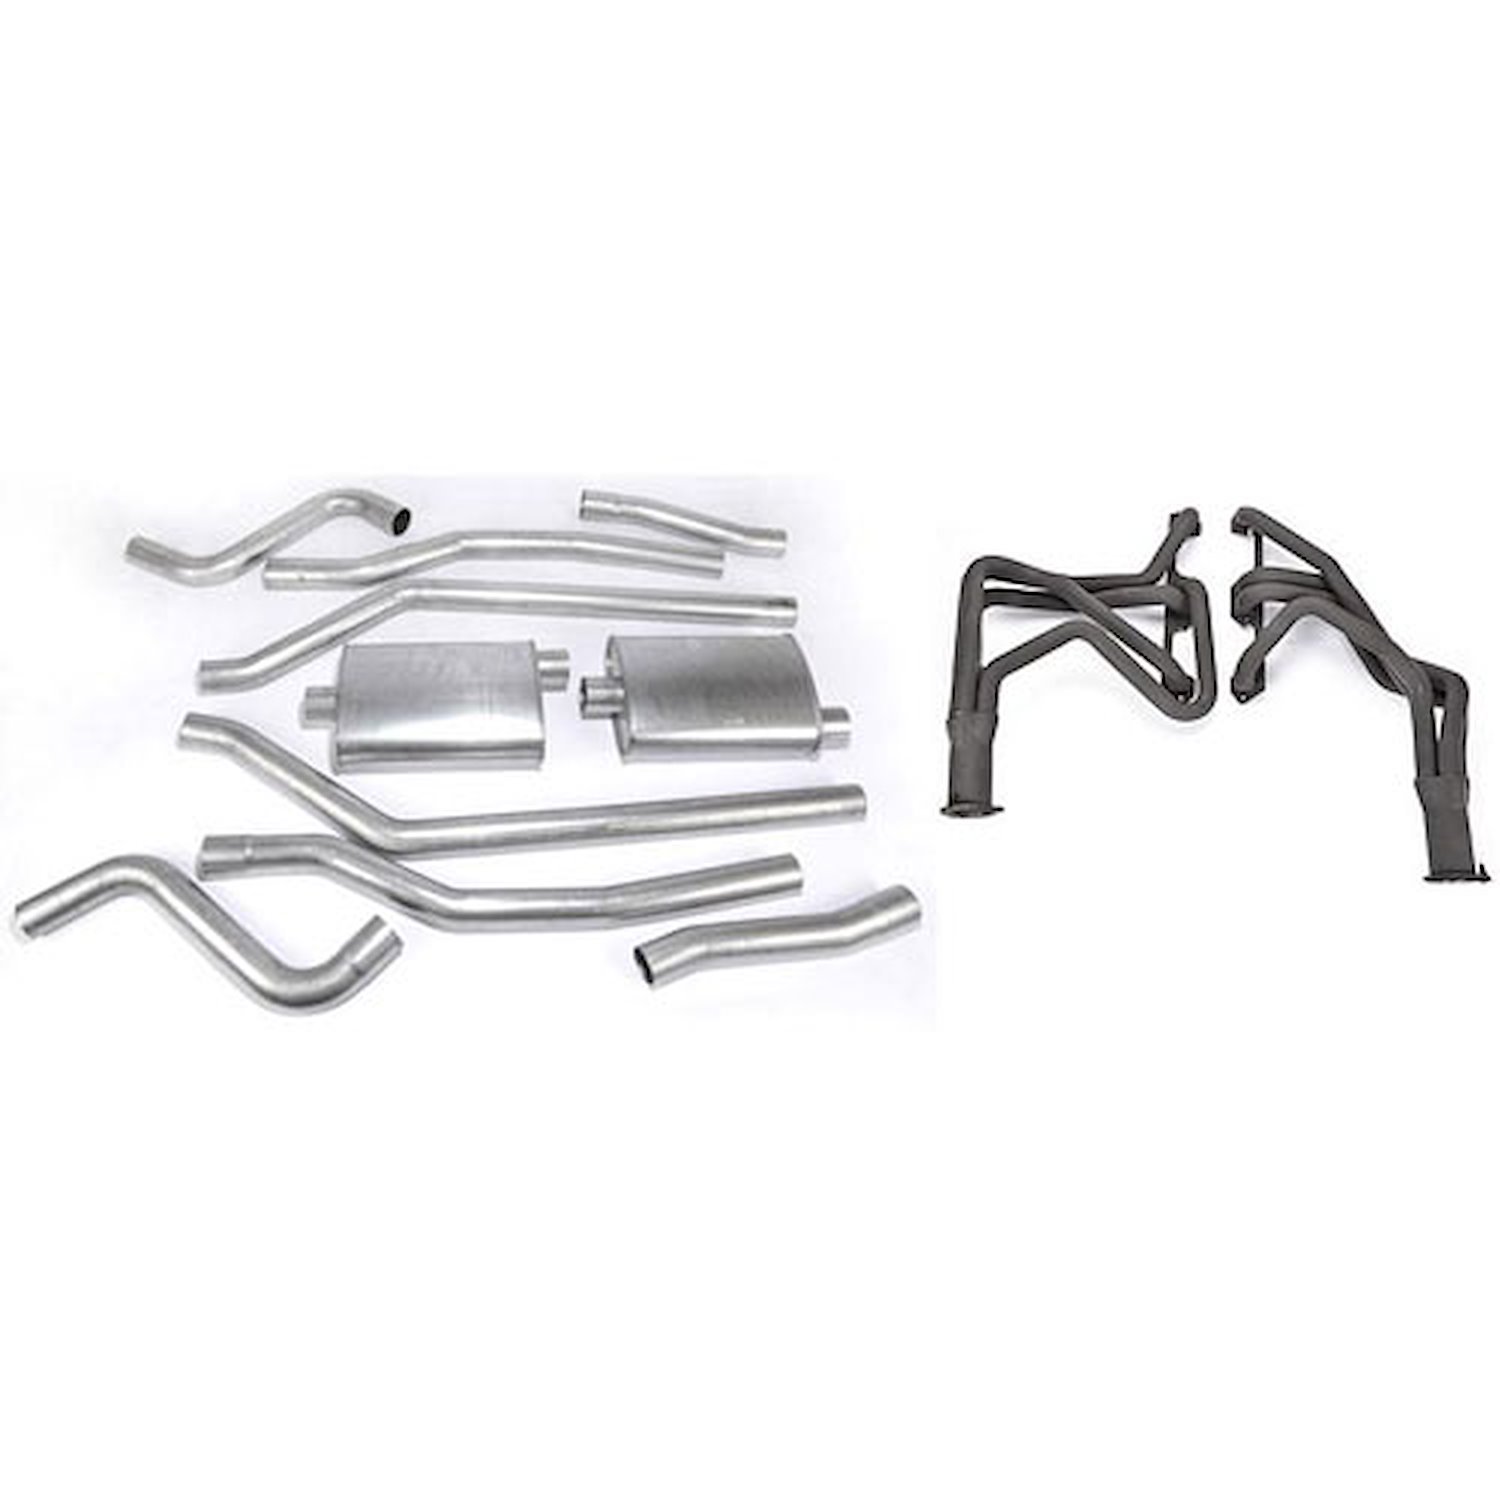 Complete Header Exhaust System Fits: (Small Block Mopar 318-360ci) 1968-74 Dodge Charger/Coronet/Super Bee/RT